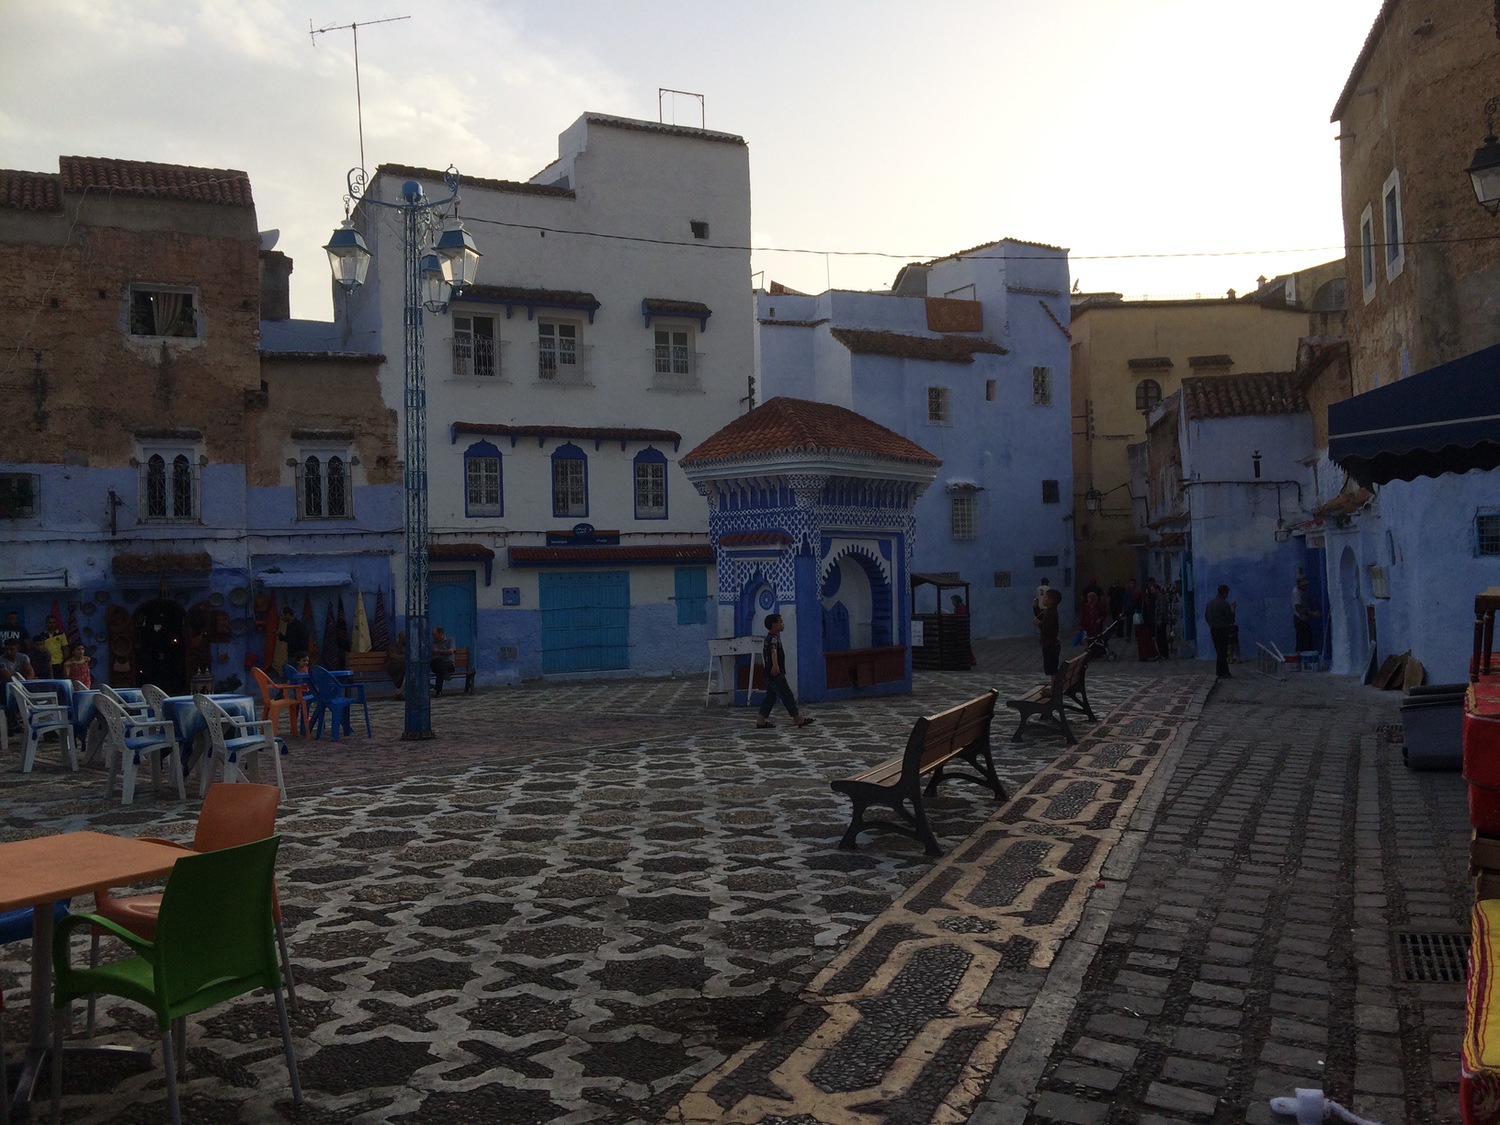 View across the square in the morning